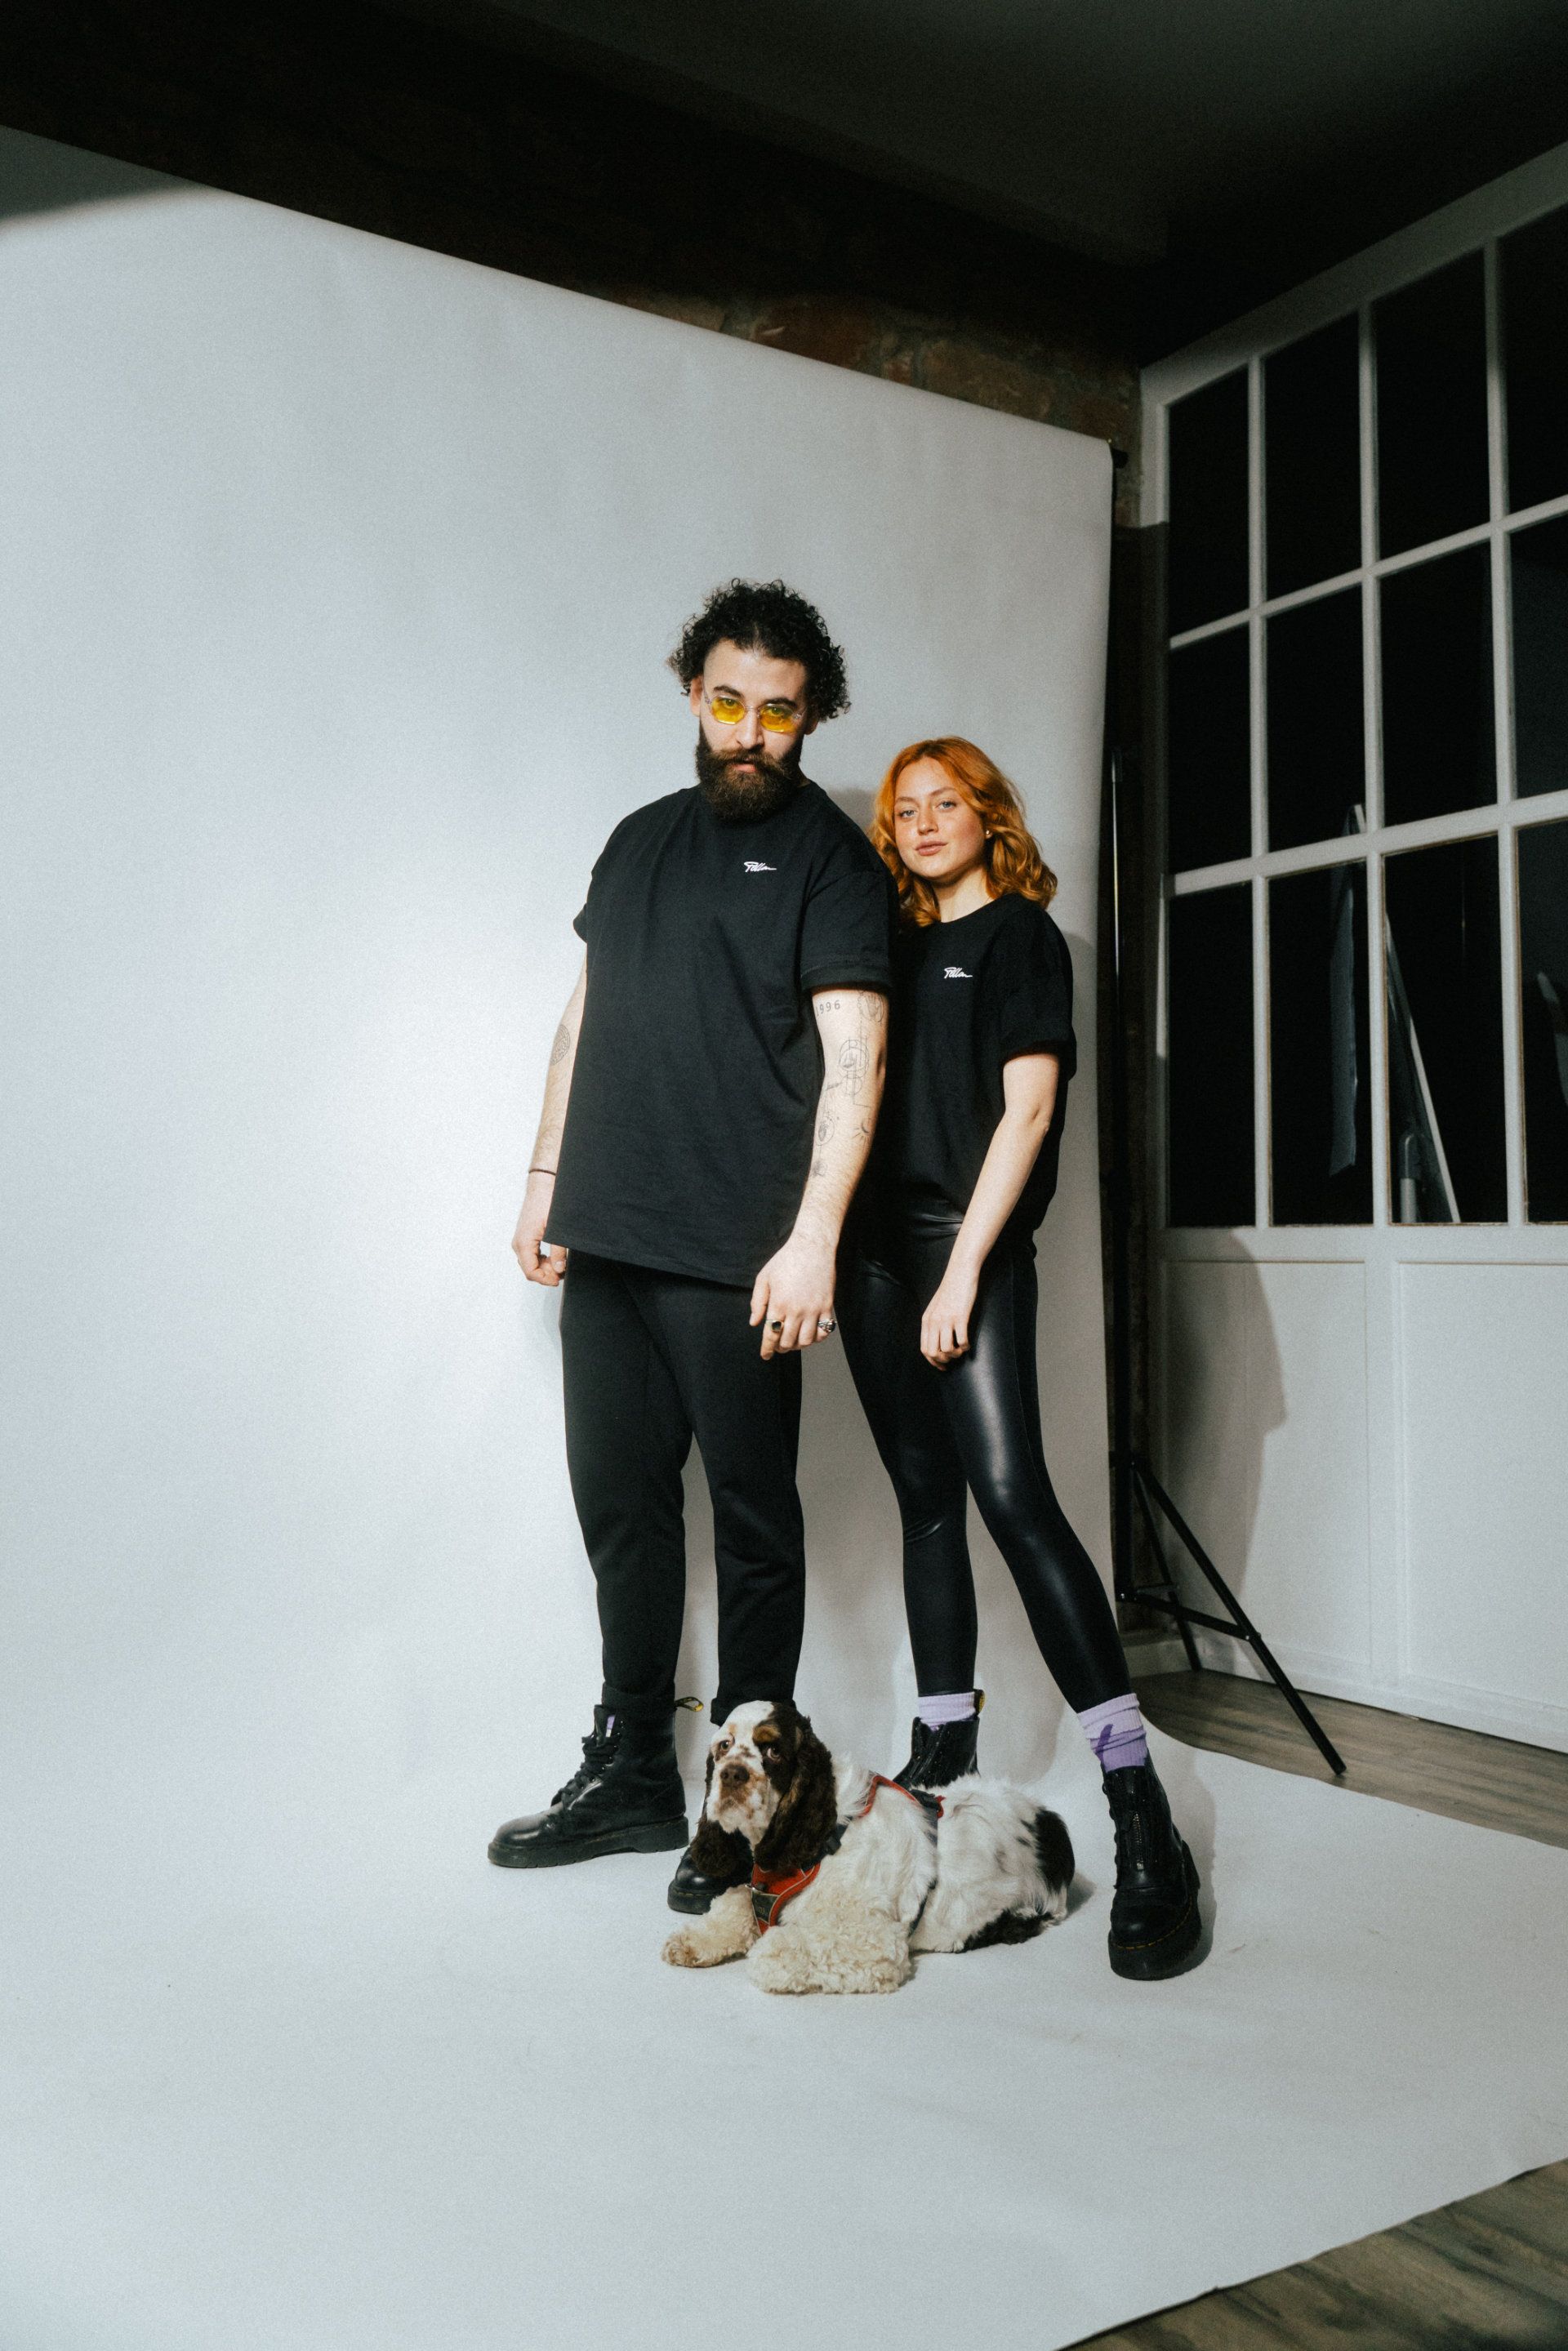 A stylish couple posing in a photo studio with a cute dog at their feet, taken by a photographer from Aschaffenburg.